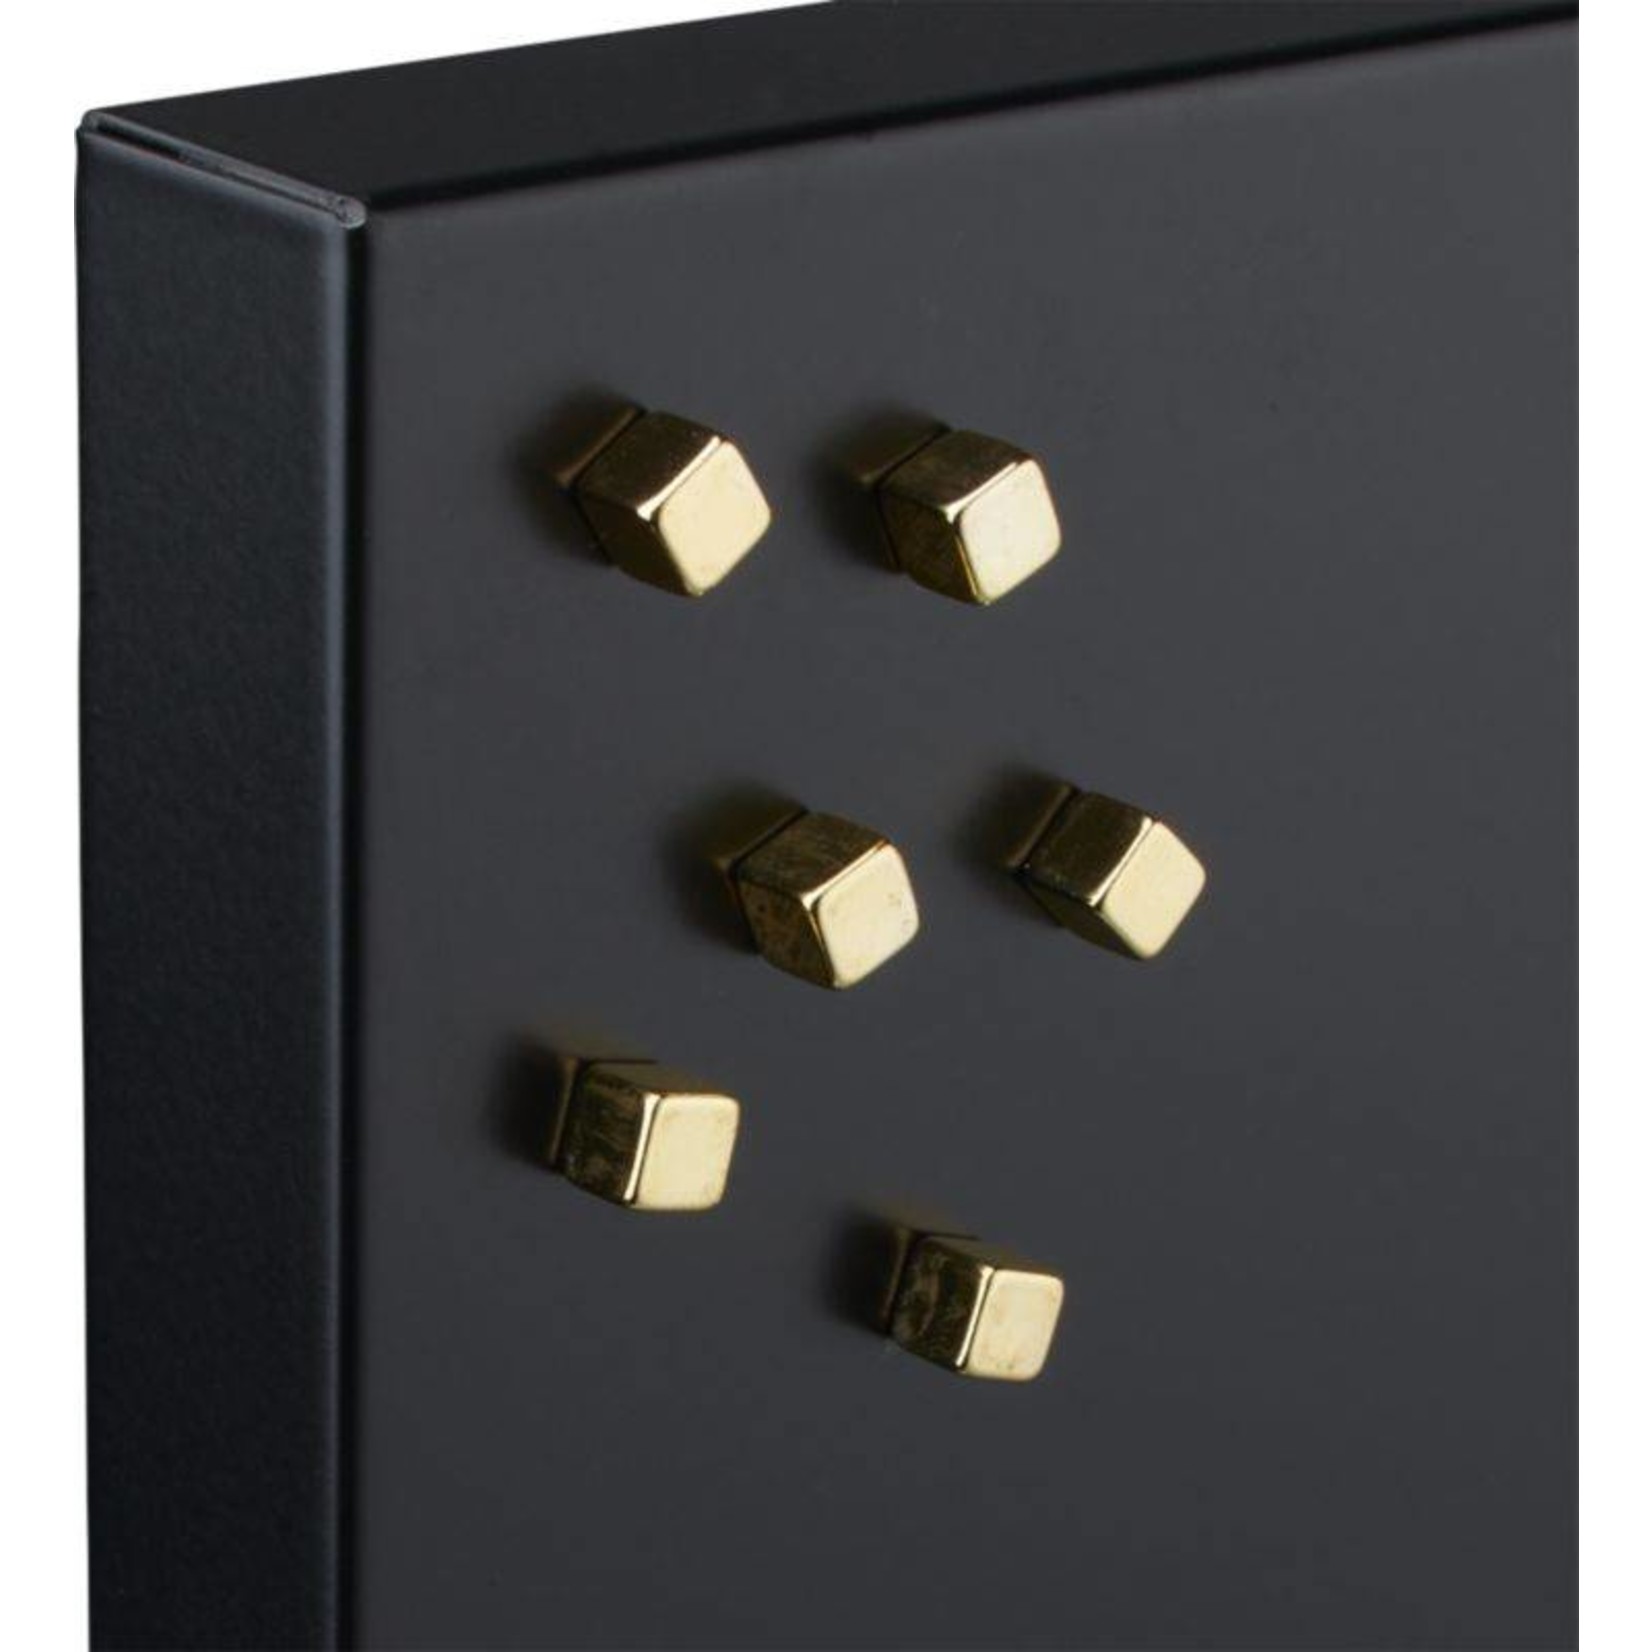 THREE BY THREE 12 Cube Mighty Magnet in Gold